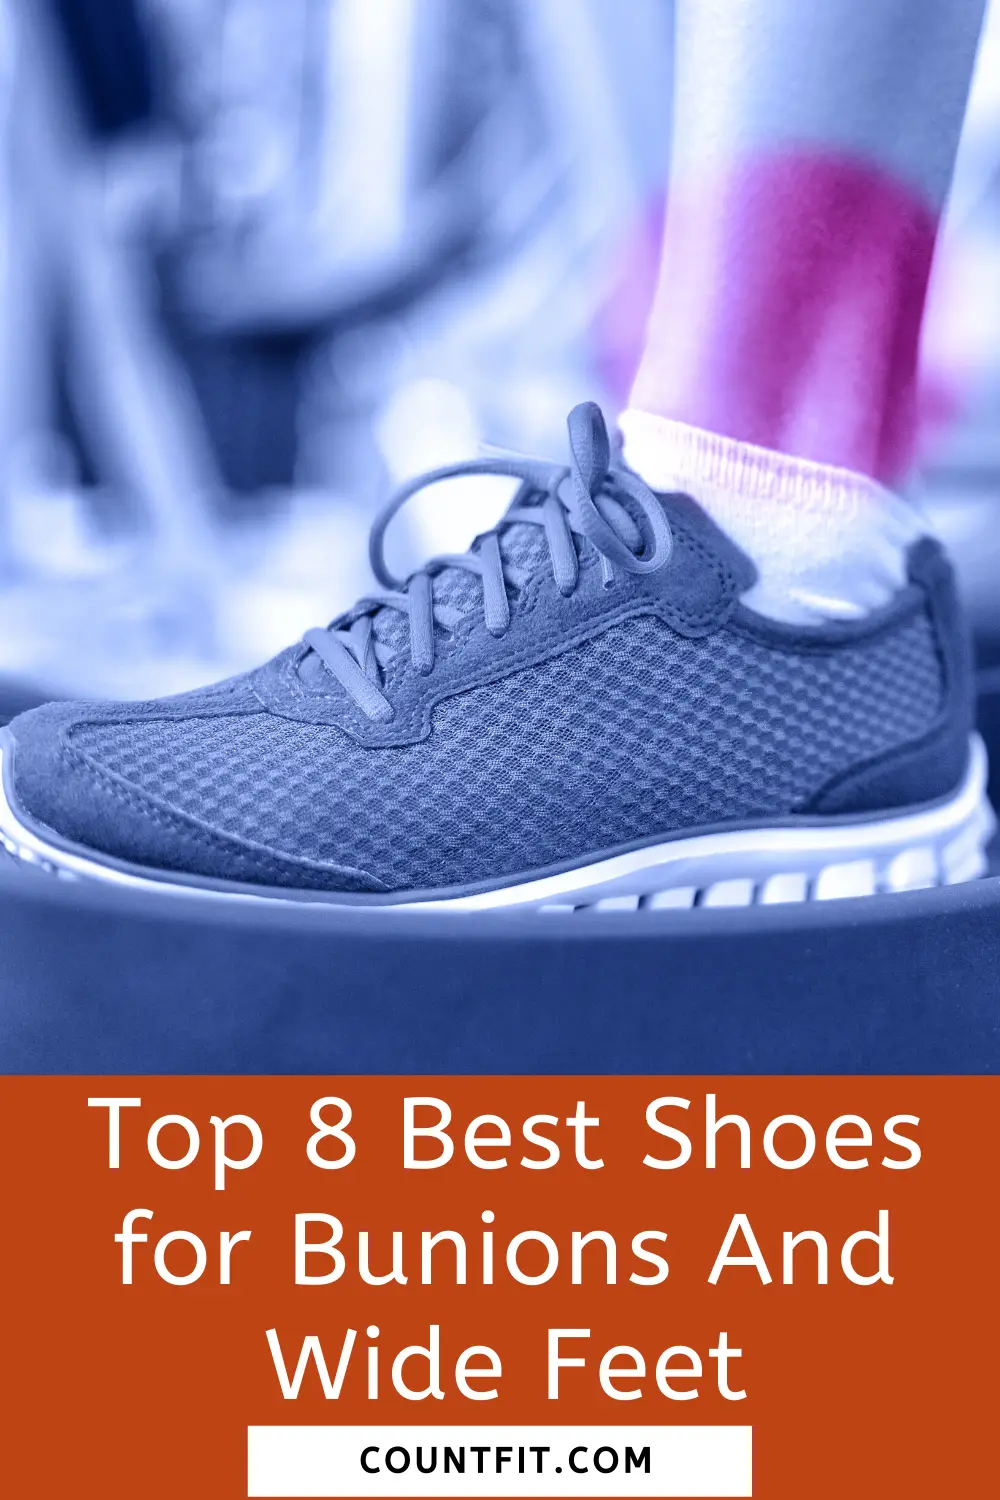 Top 8 Best Shoes for Bunions And Wide Feet in 2020